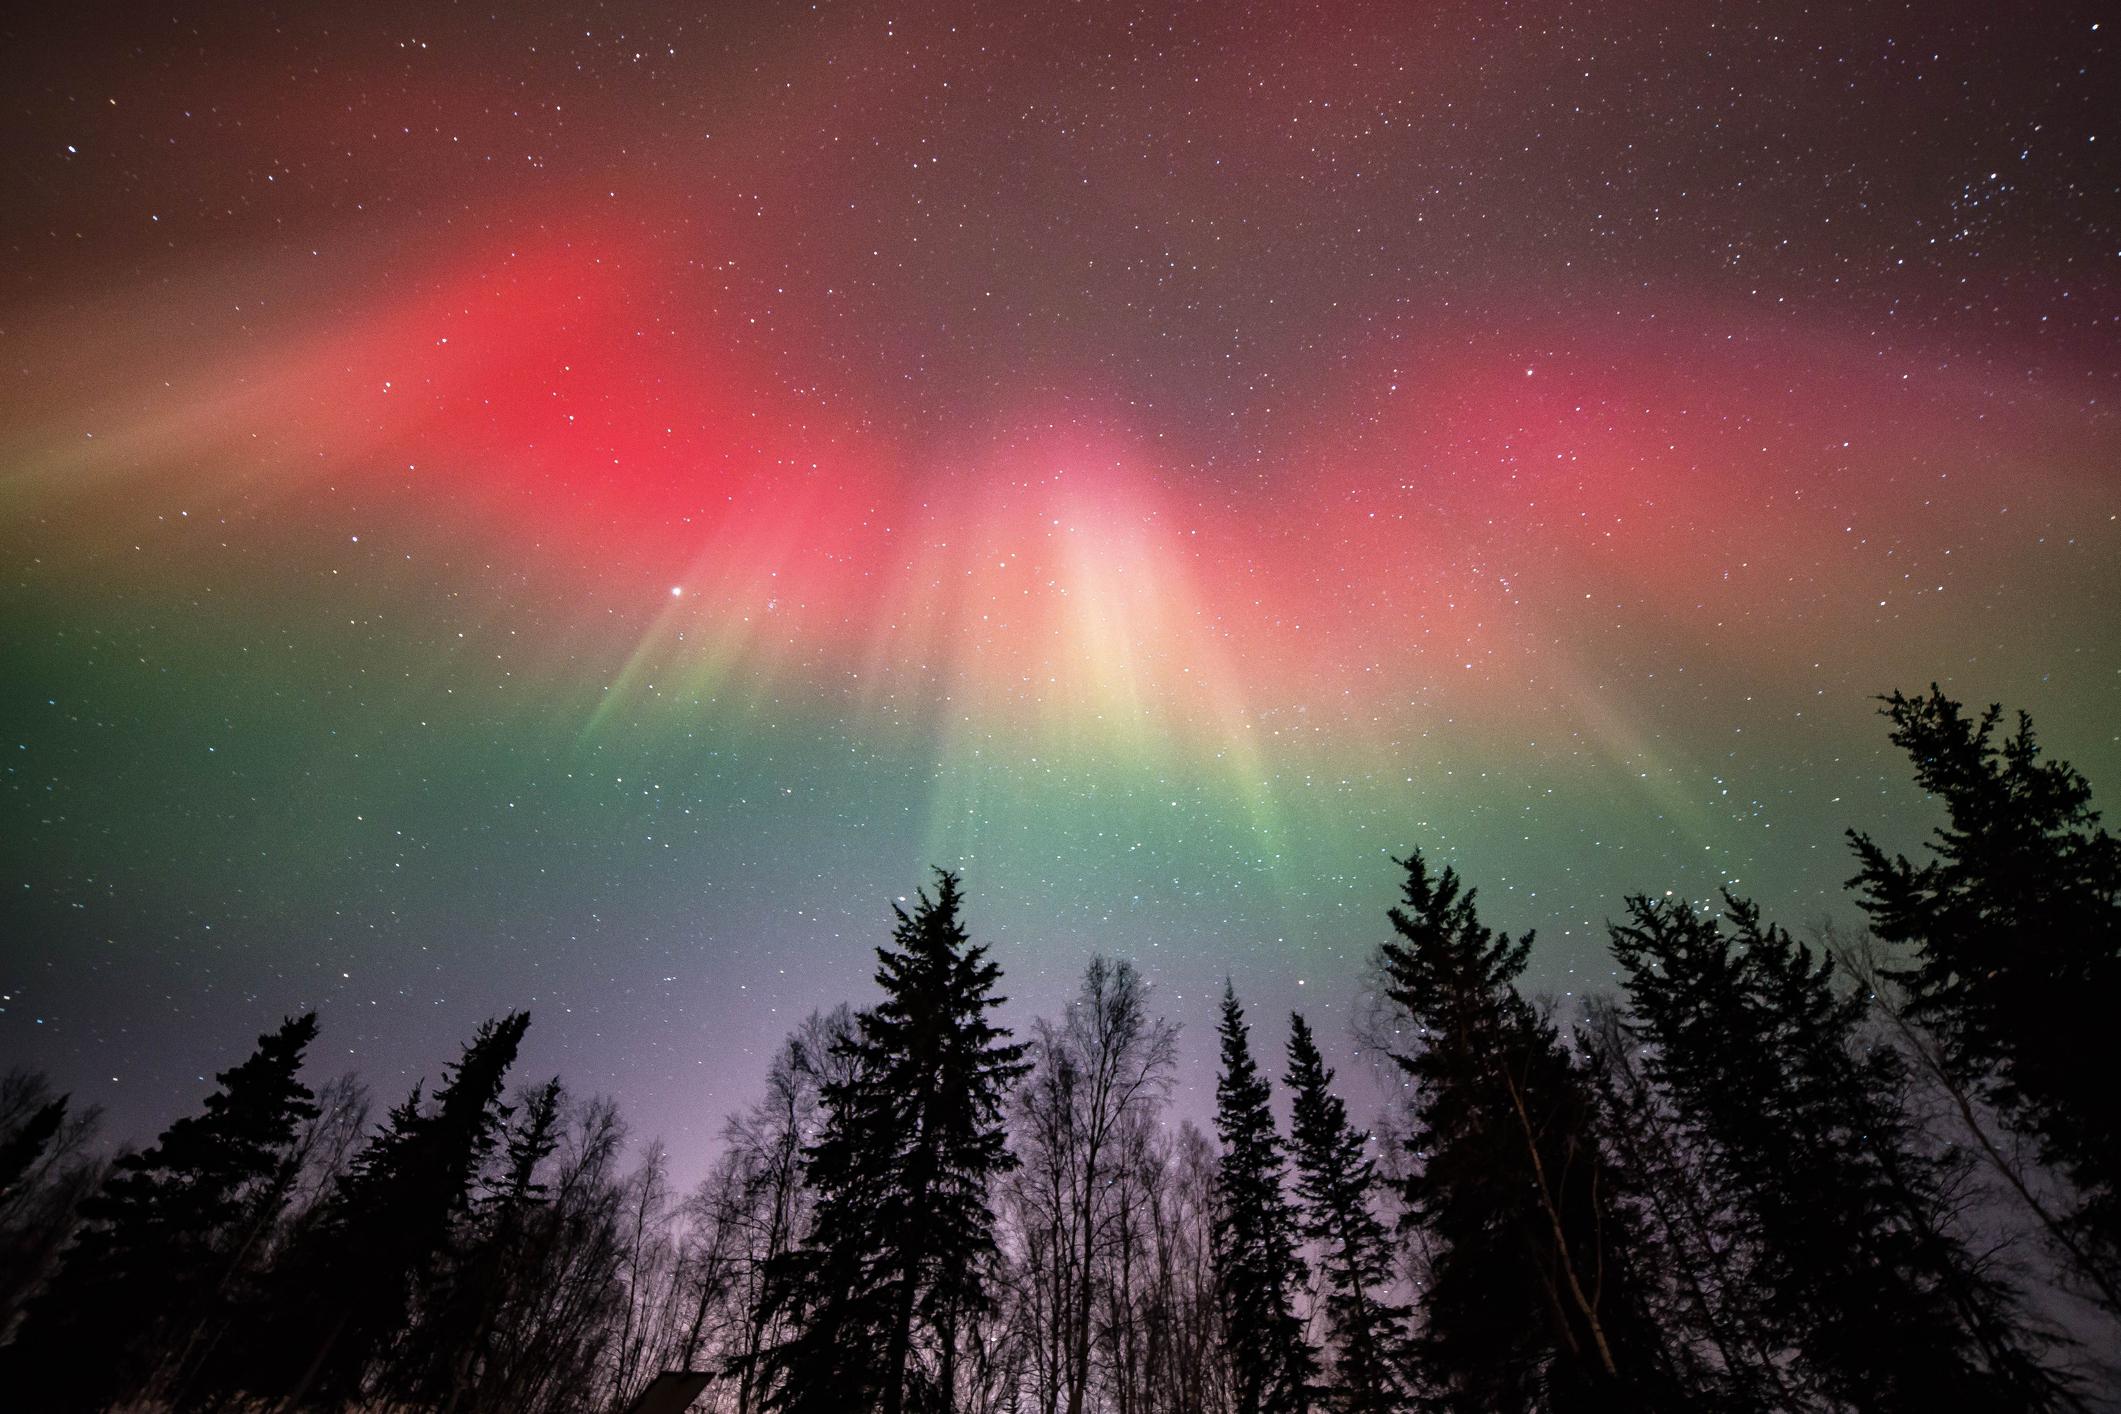 A unique northern lights display in Yellowknife, Canada. Photo: Getty.